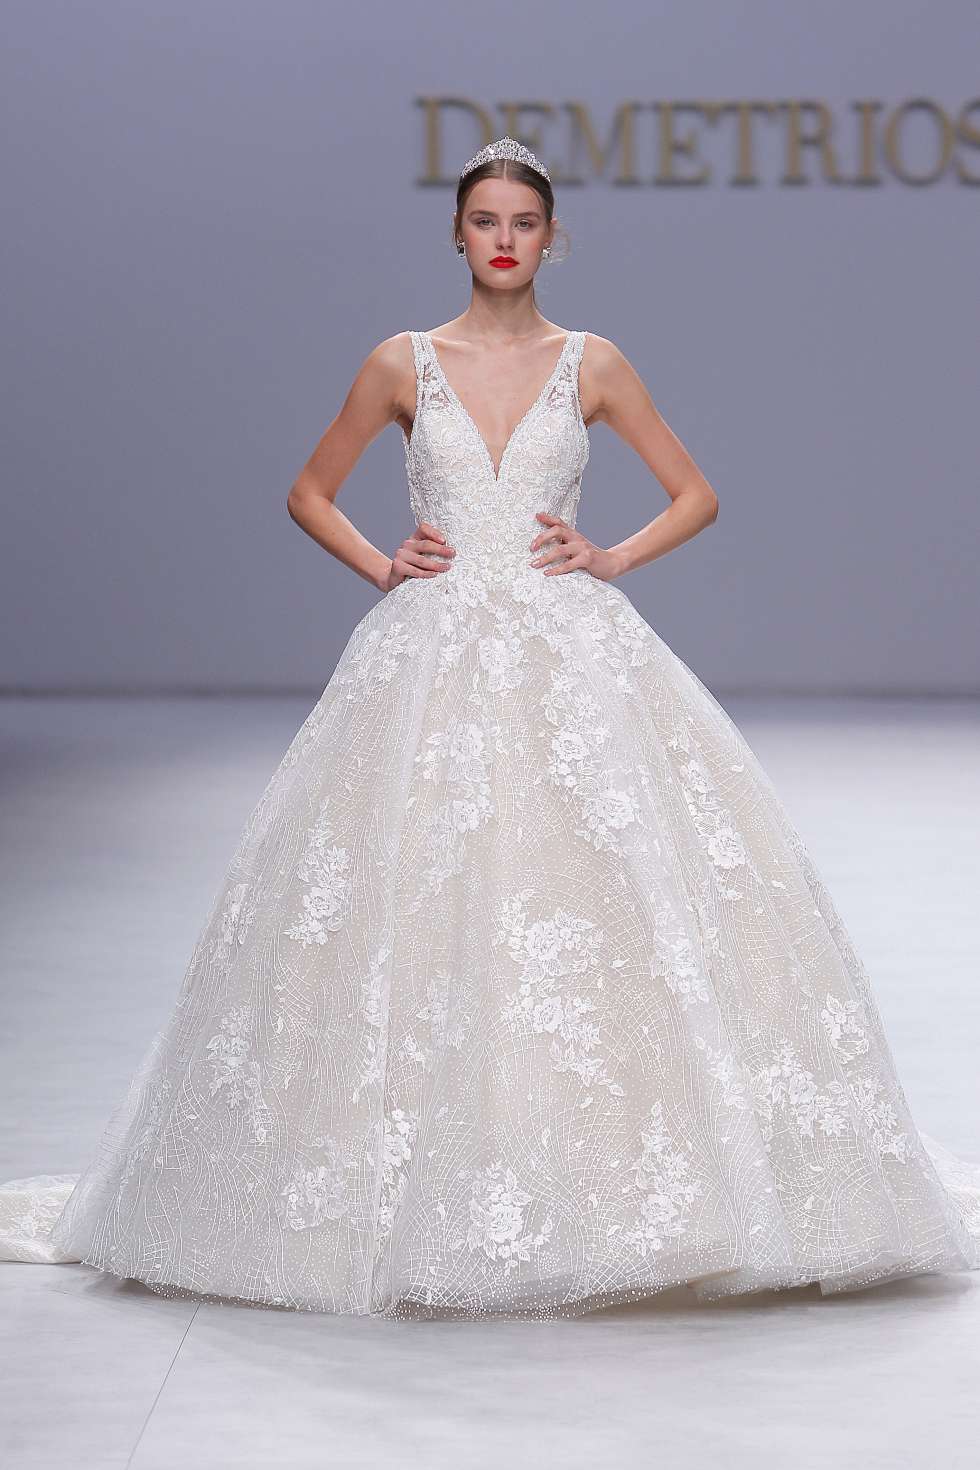 Let Love Reign Bridal Collection by Demetrios